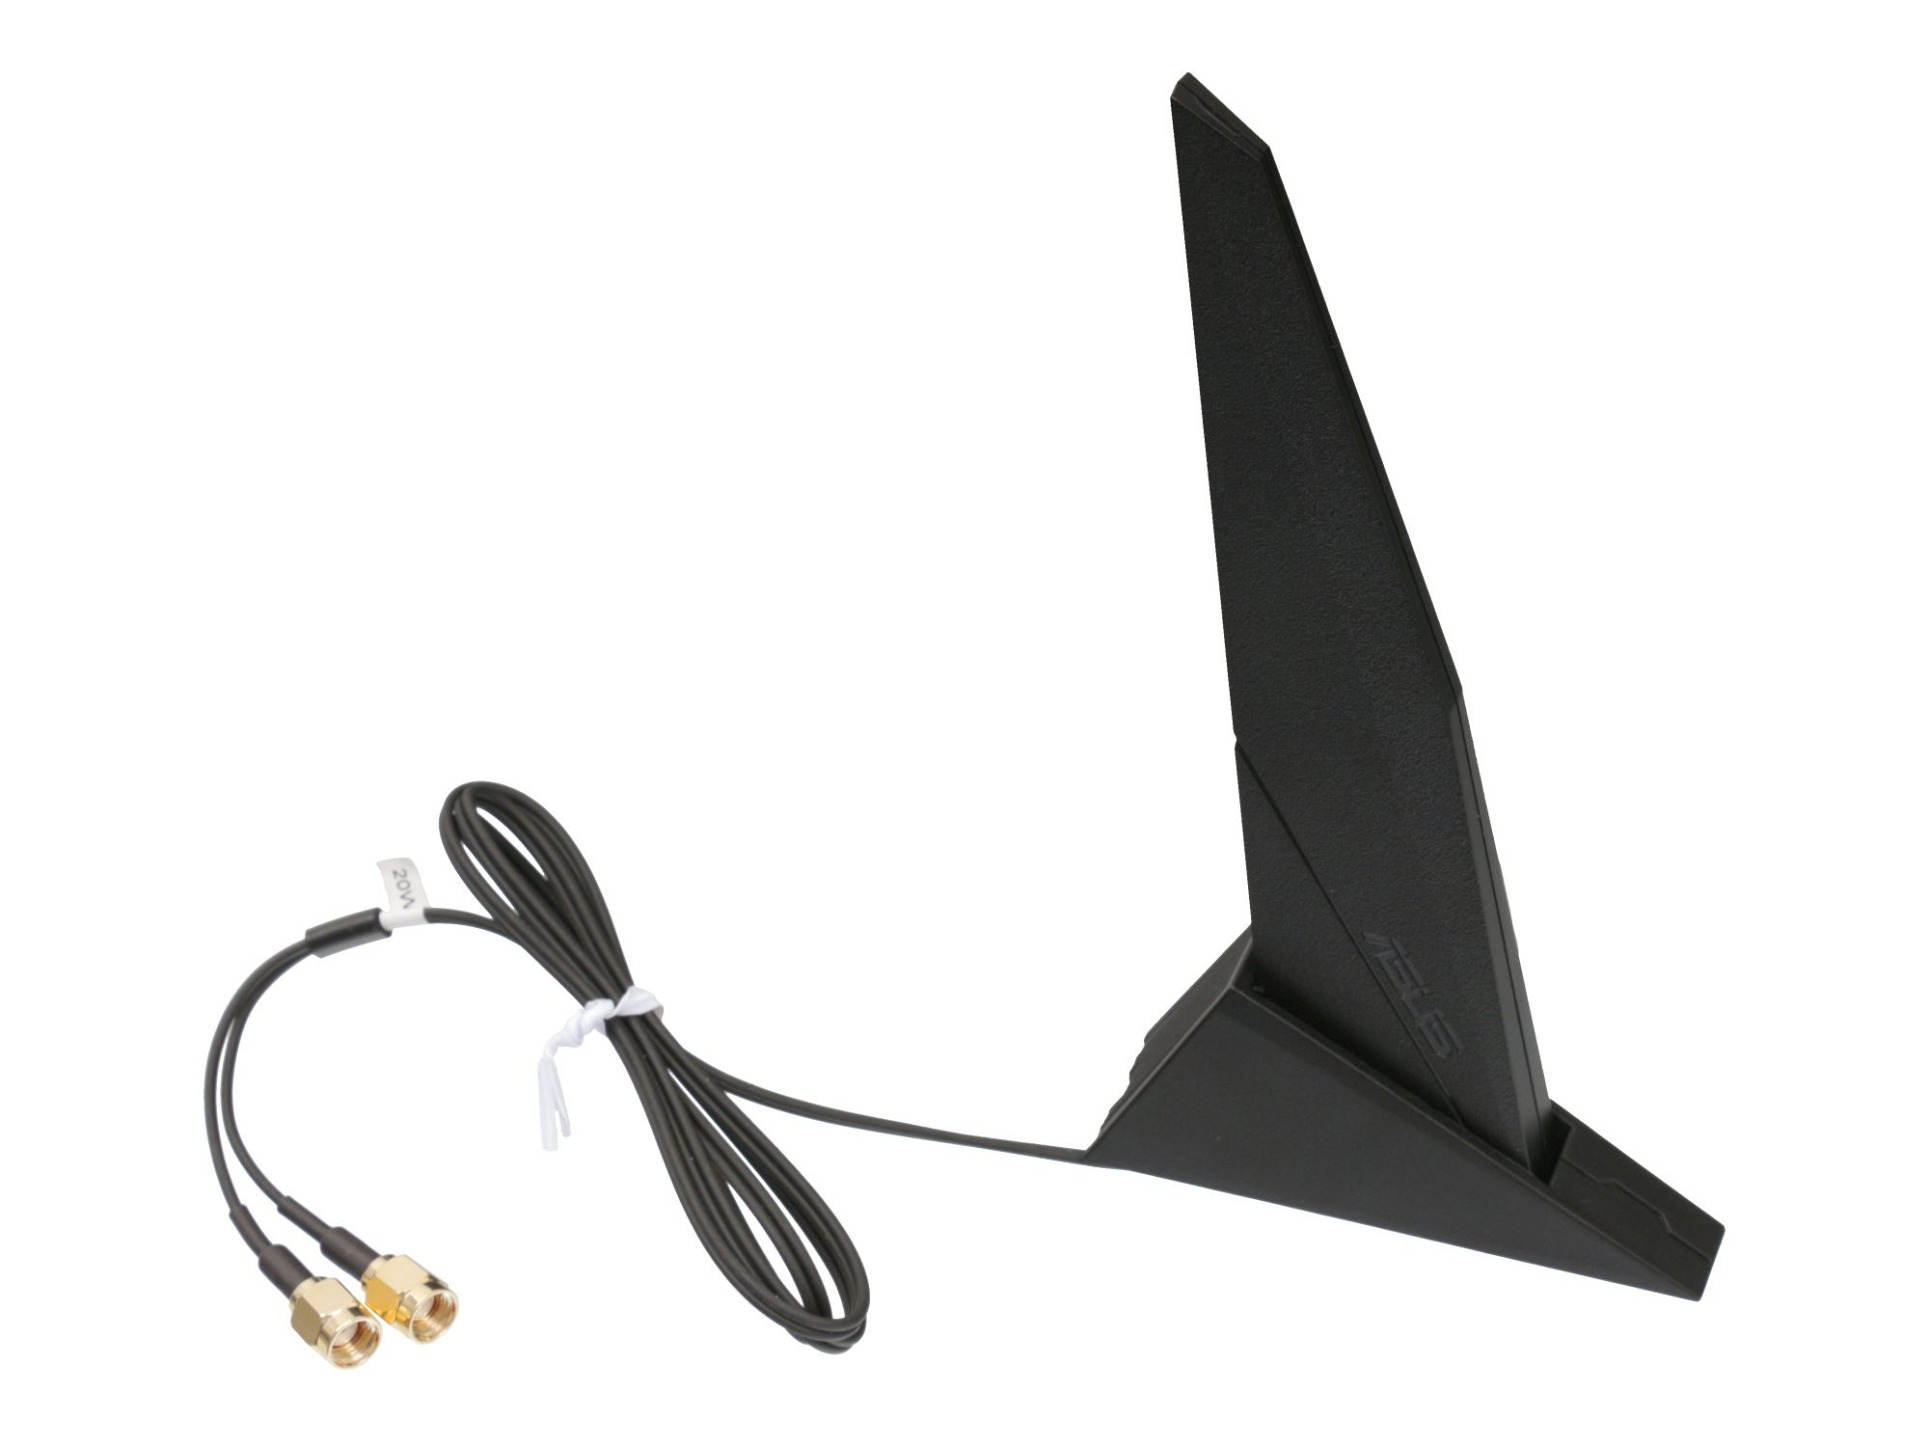 Externe Asus RP-SMA DIPOLE Antenne für Asus ROG Strix Z590-A GAMING WIFI